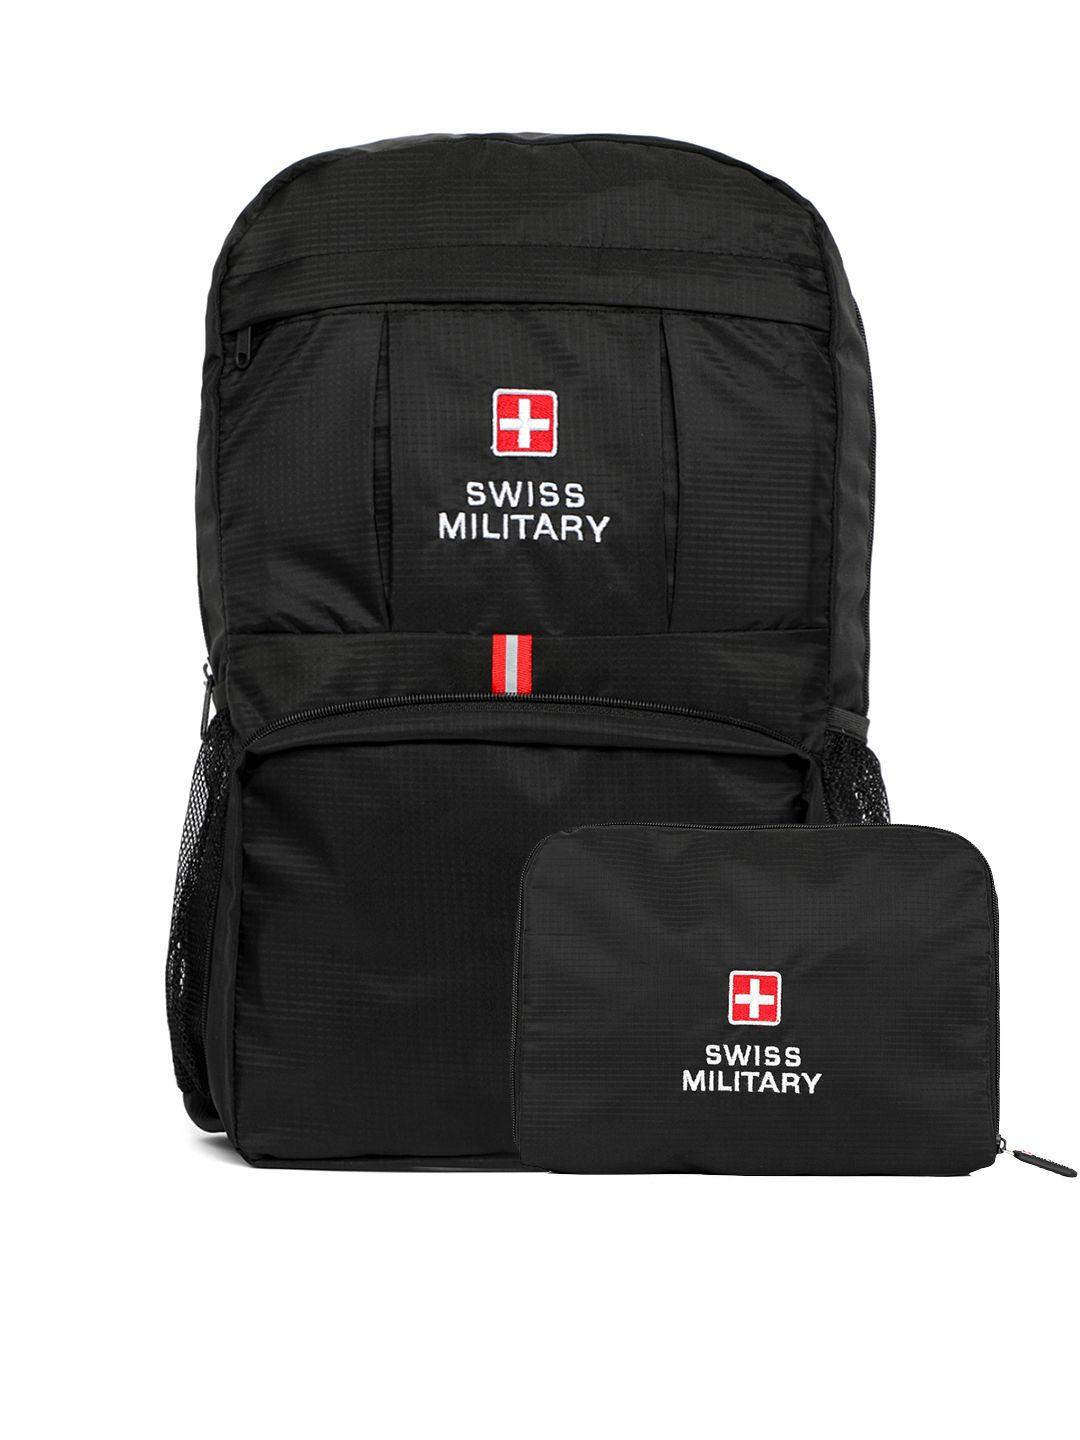 swiss military unisex black solid backpack